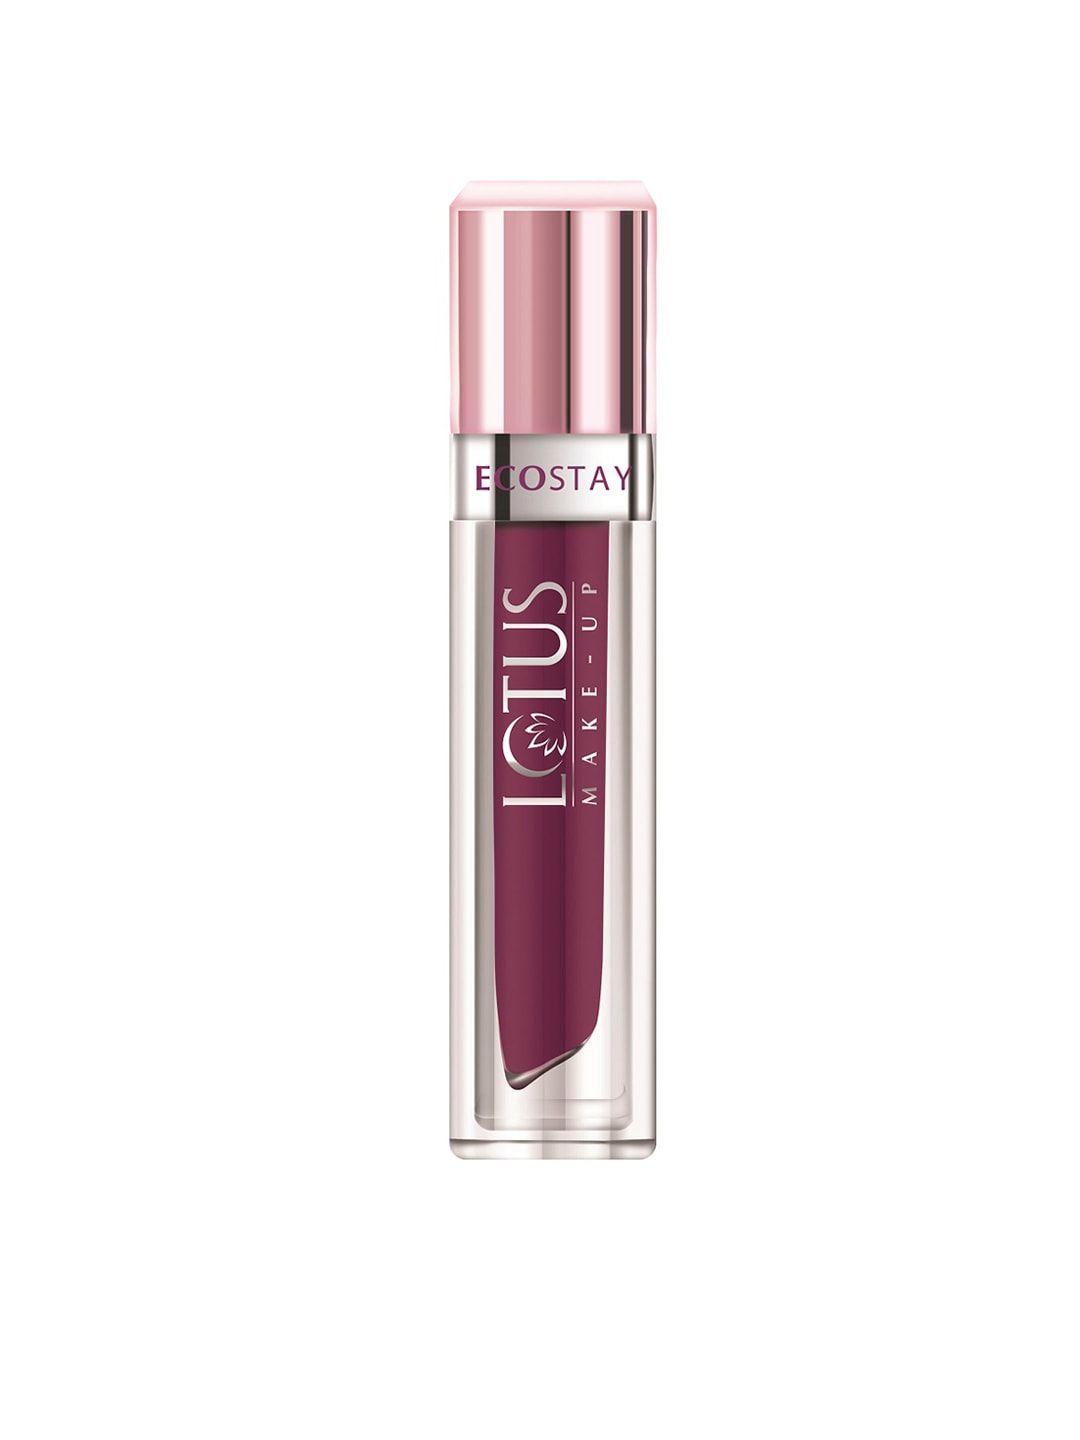 lotus herbals sustainable make-up ecostay matte lip lacquer - plum berry el06 4gm